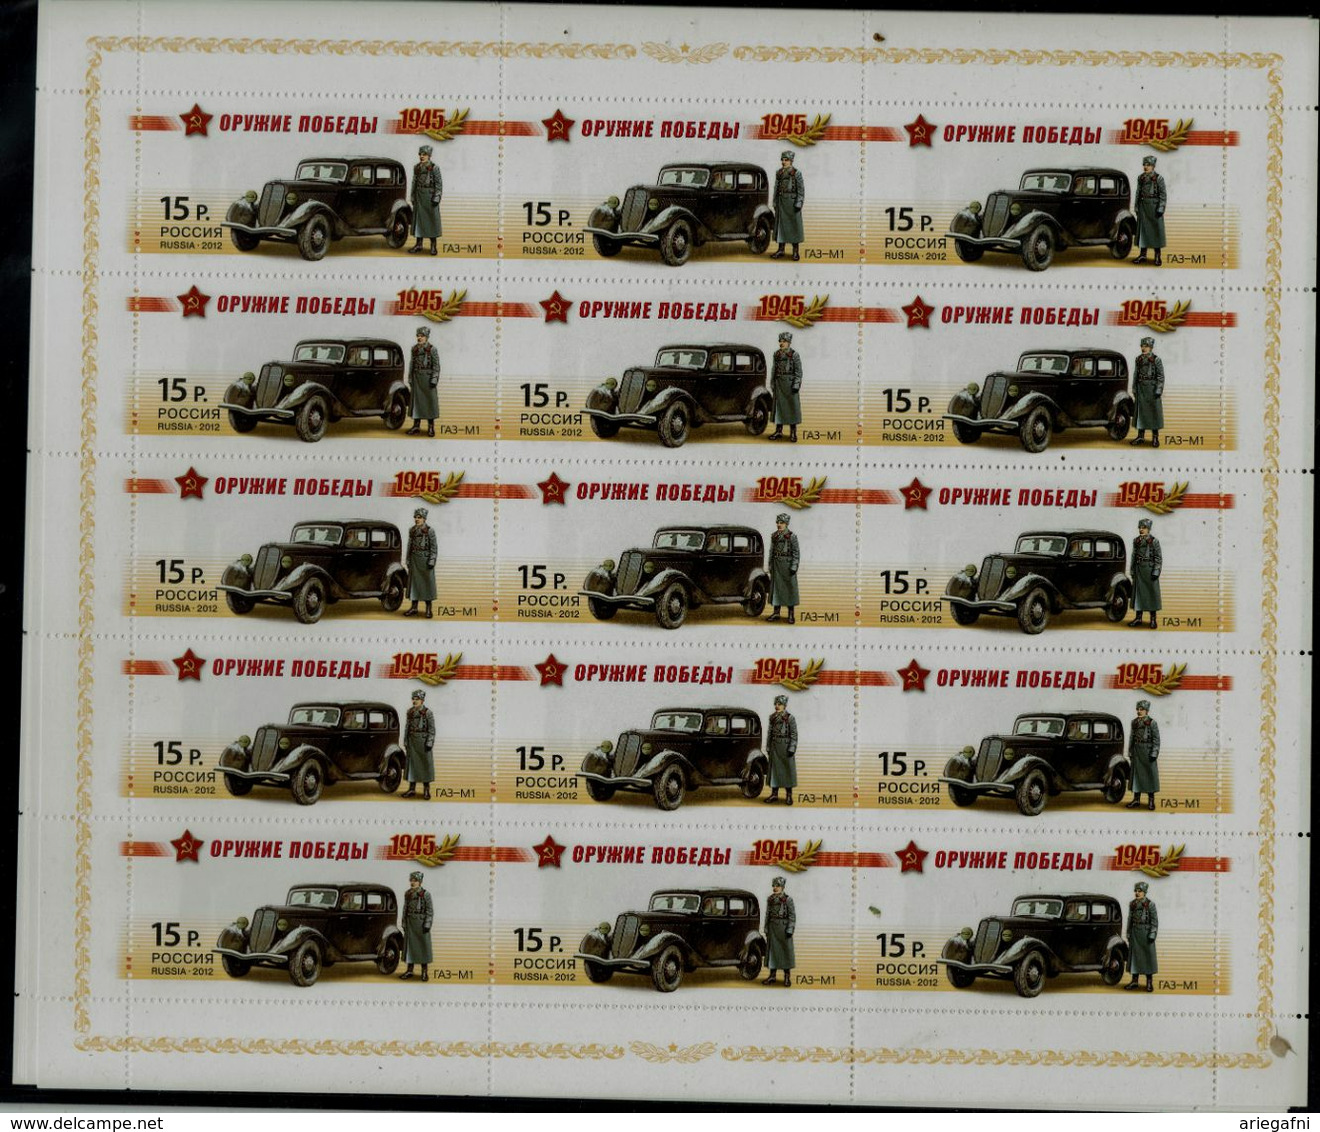 RUSSIA 2012 ARMS OF VICTORY: MOTOR VEHICLES SET OF 4 FULL SHEET MI No 181-4 MNH VF !! - Hojas Completas